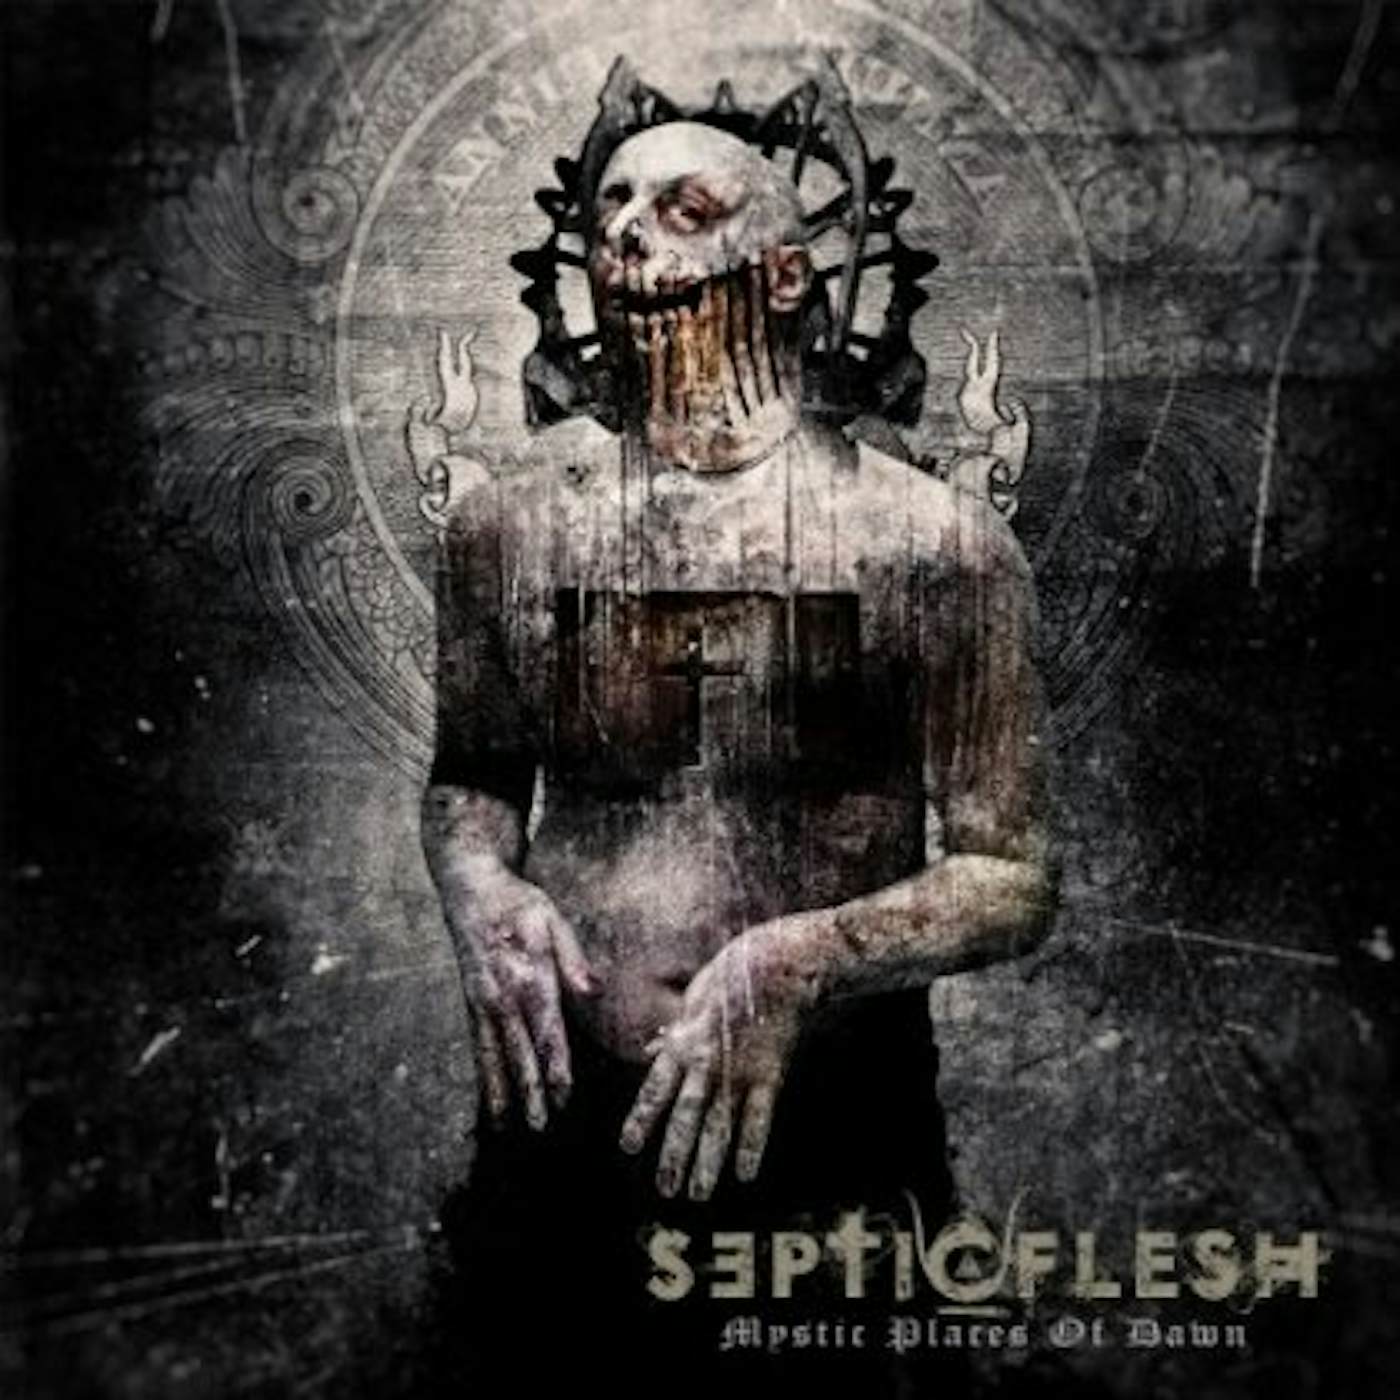 Septicflesh MYSTIC PLACES OF DAWN CD